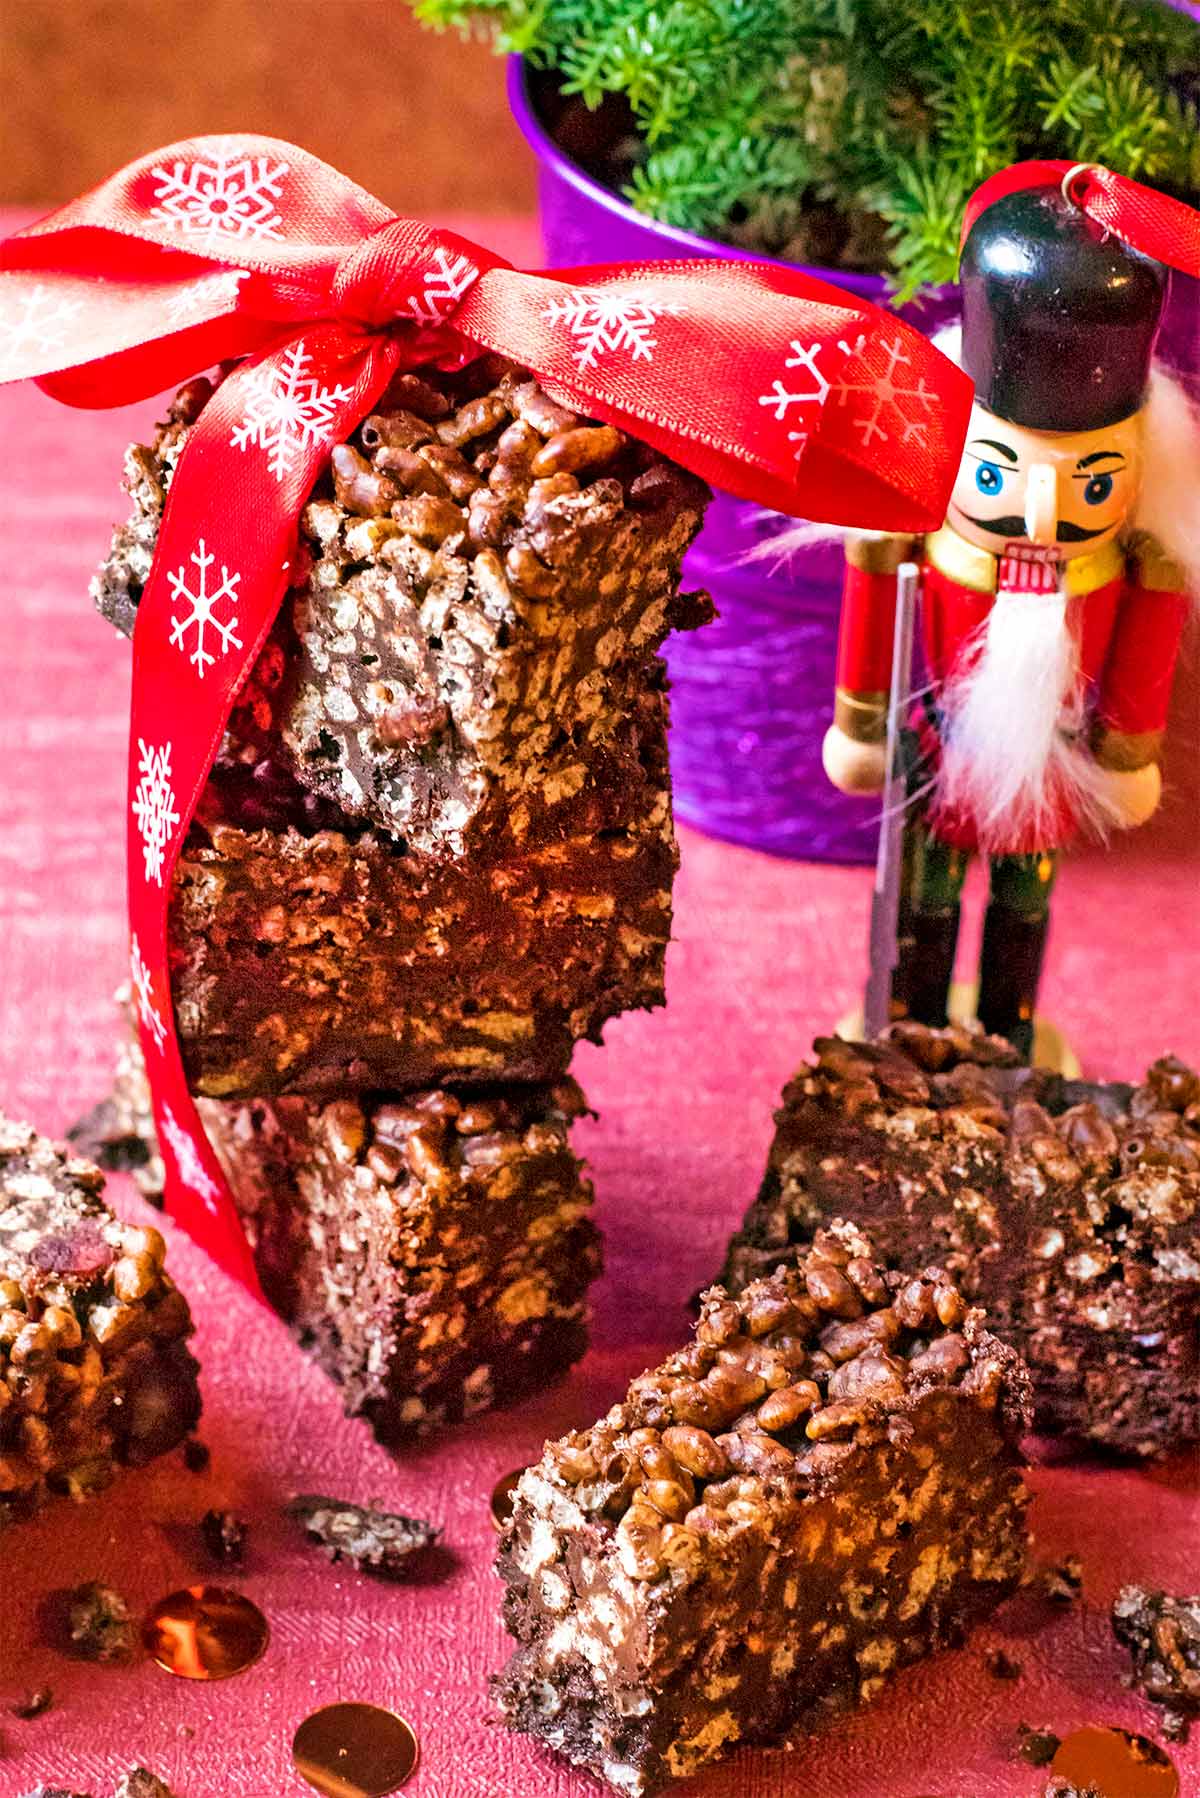 Rice Krispie bars tied with a red bow. A toy soldier stands next to them.